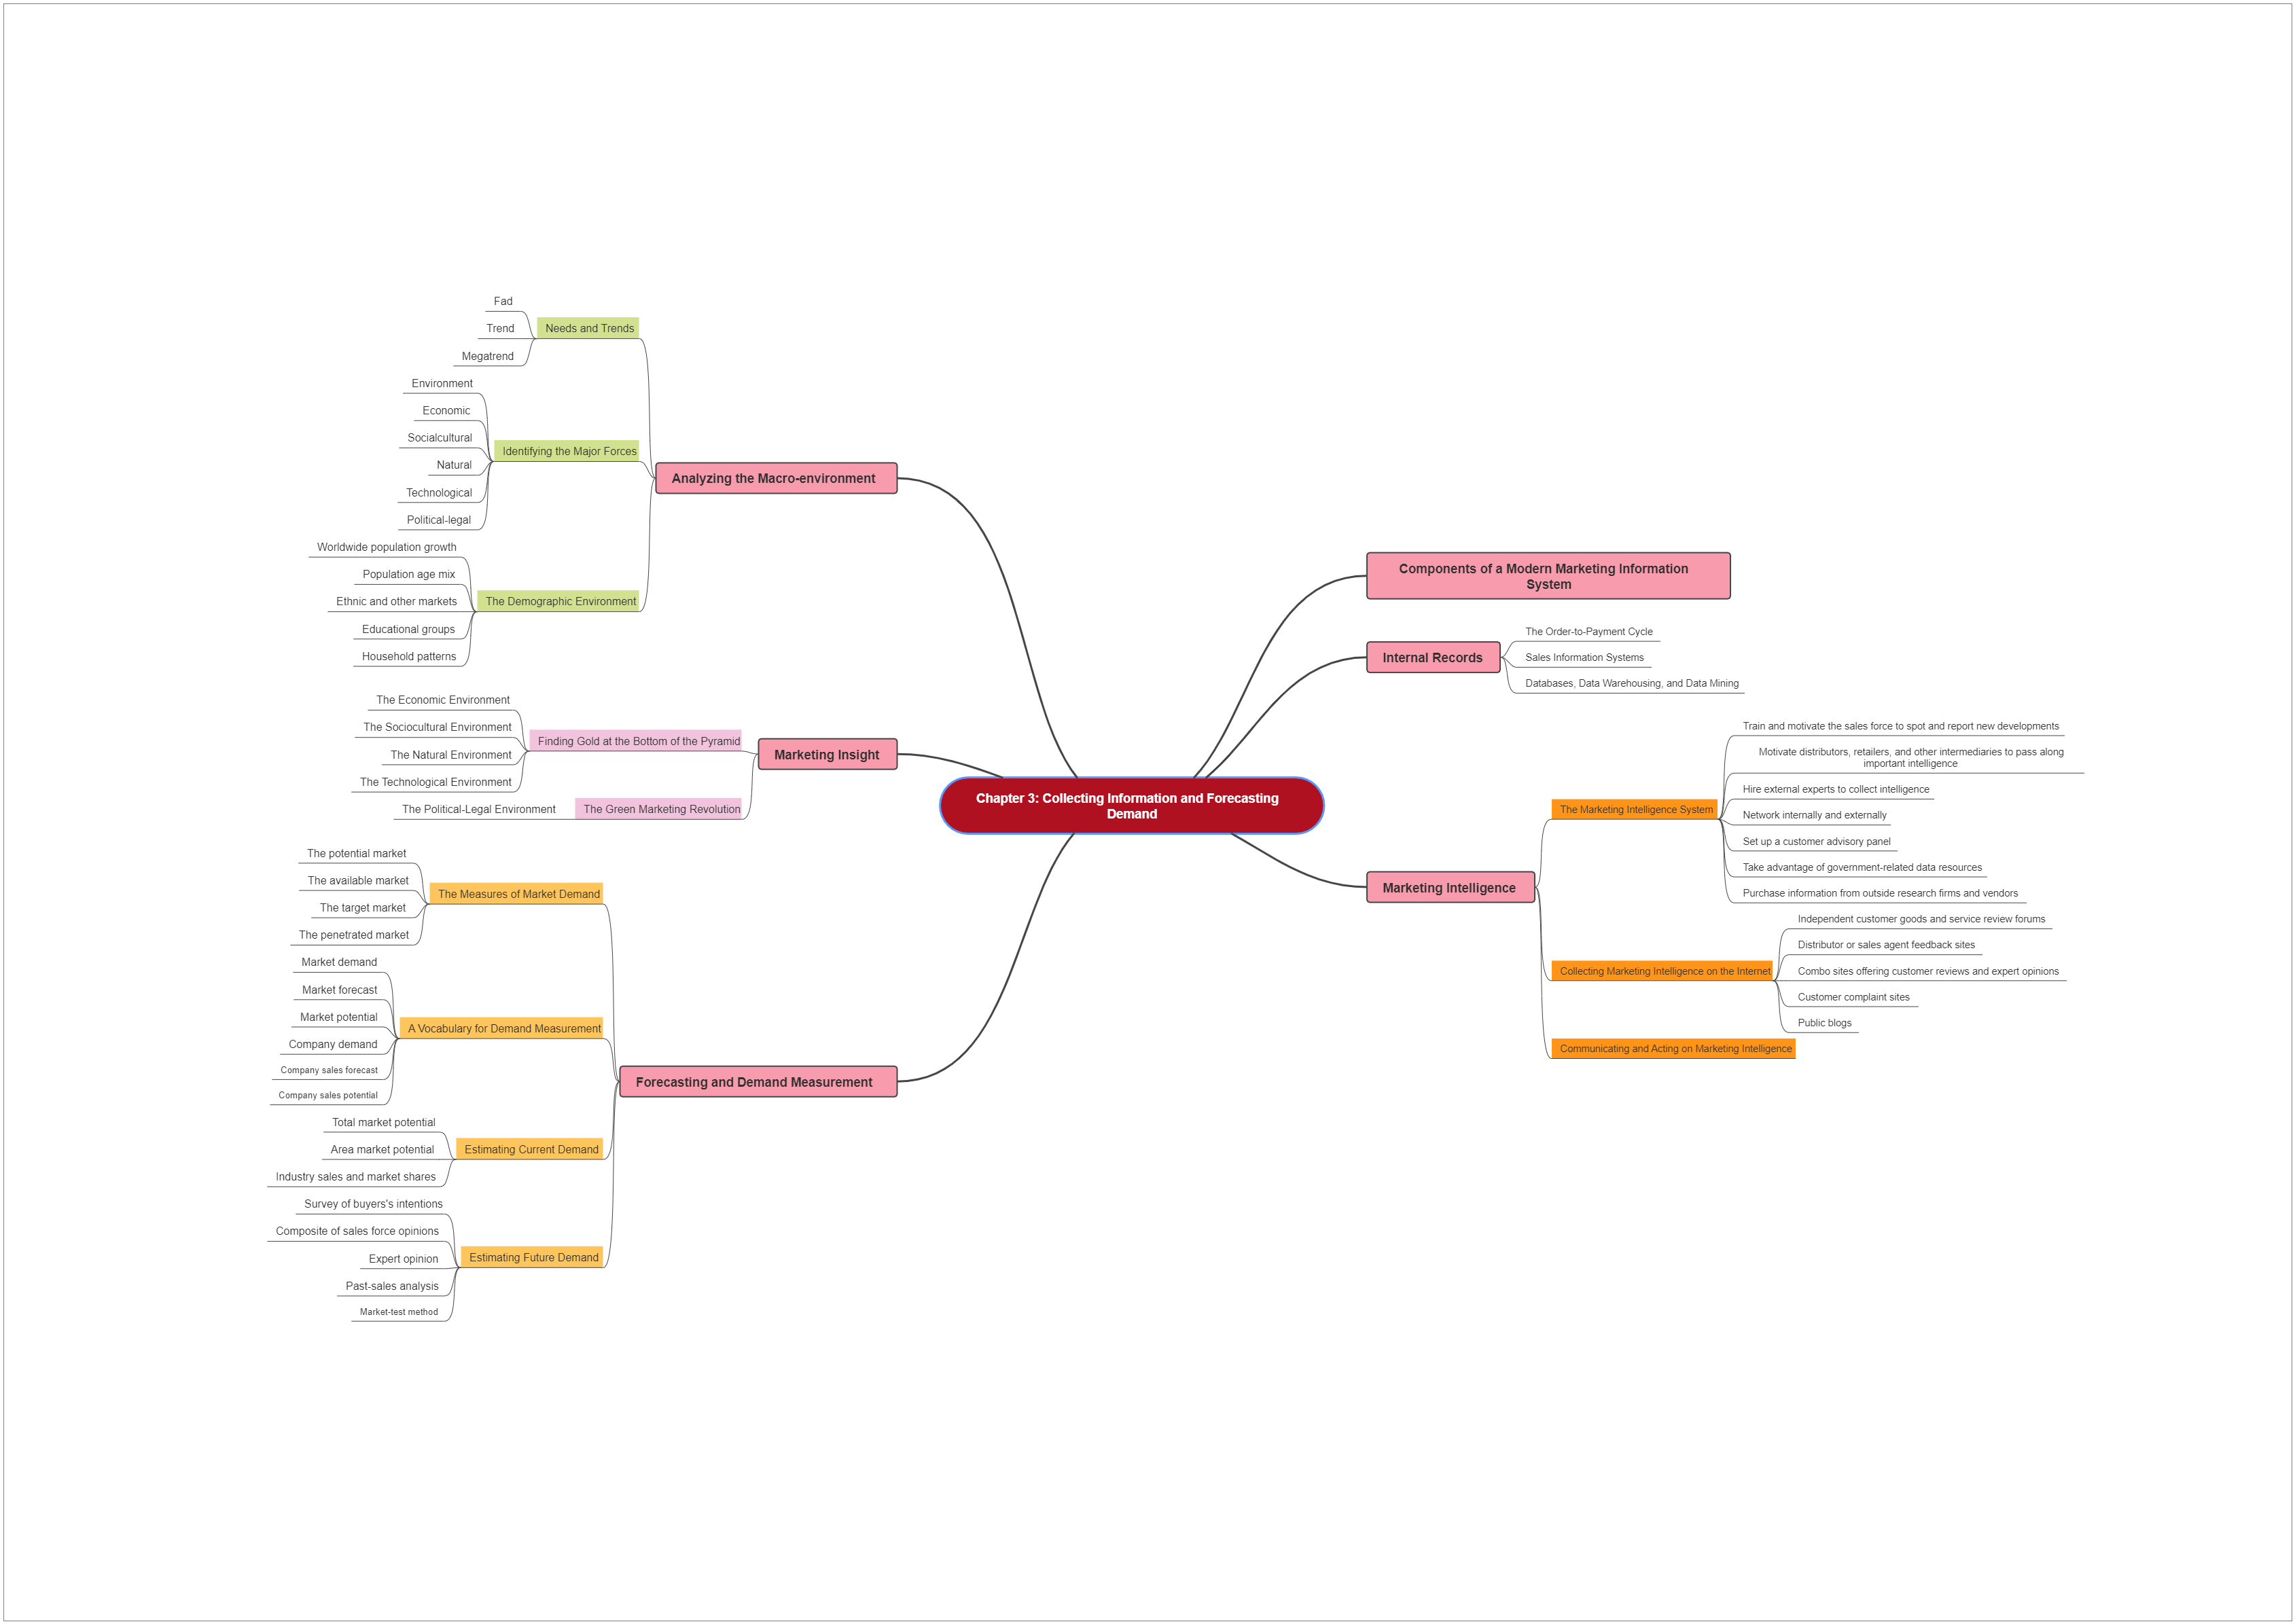 Collecting Information and Forecasting Demand Mind Map